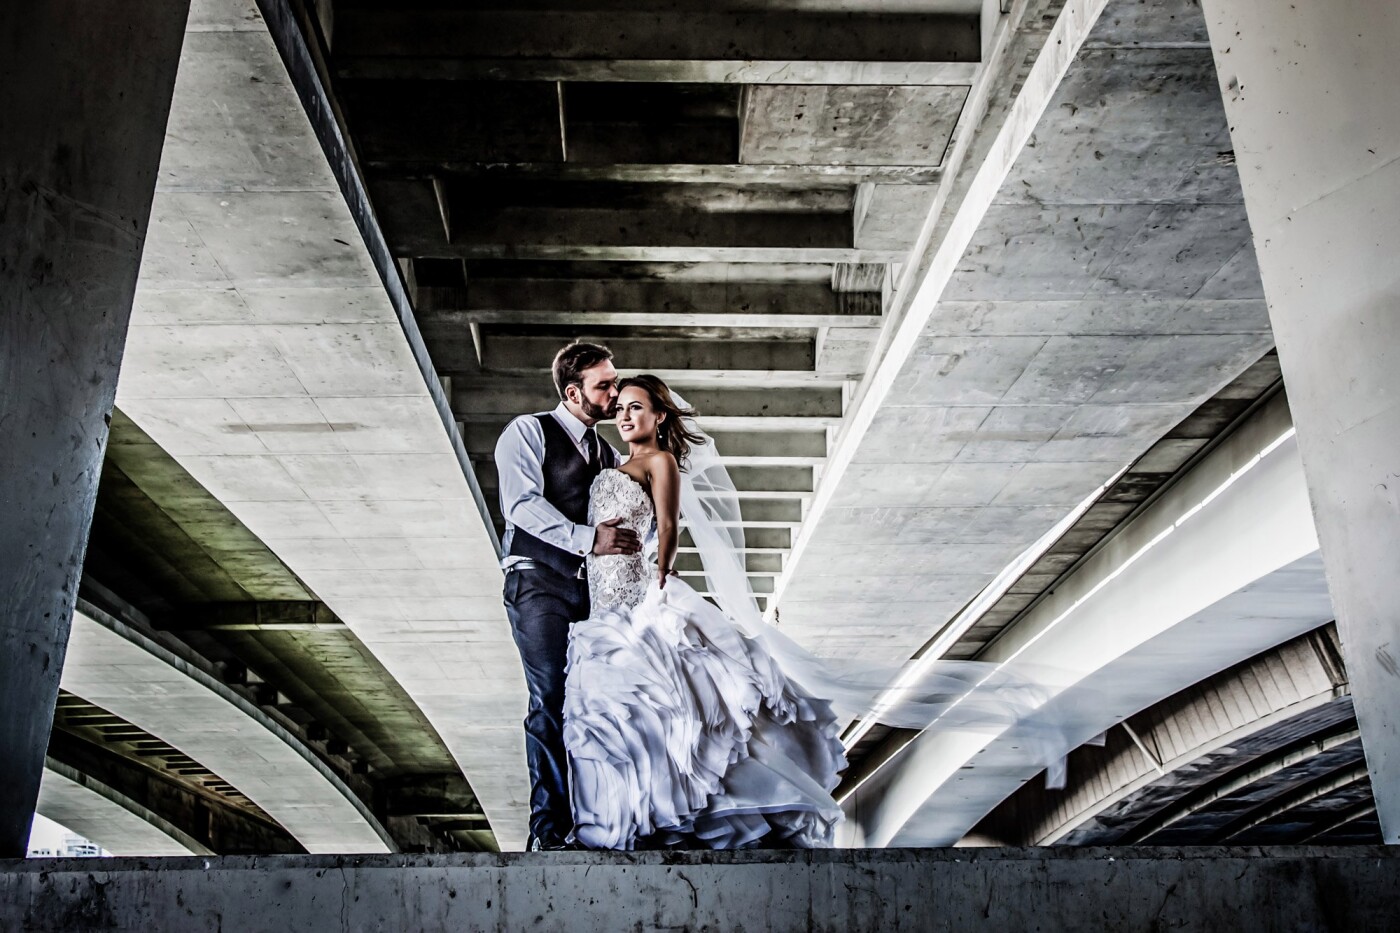 This image was captured underneath a bridge spanning the Swan River in Perth. Our couple wanted a shot across the river showing the city skyline. Whilst we were there we kept looking at the strong lines of the underneath part of the bridge. So, we lay on the floor to see if it would work. It did, so we got our bride and groom up on the concrete wall at the river’s edge. We waited for the wind to come and ruffle the layers of her amazing, couture wedding gown and her veil and create this shot. We just love it. Our bride wanted images fit for a magazine; and that is what we gave her. We are very proud of the fact that all our wedding images submitted in competitions are of real brides and grooms on their actual wedding day.